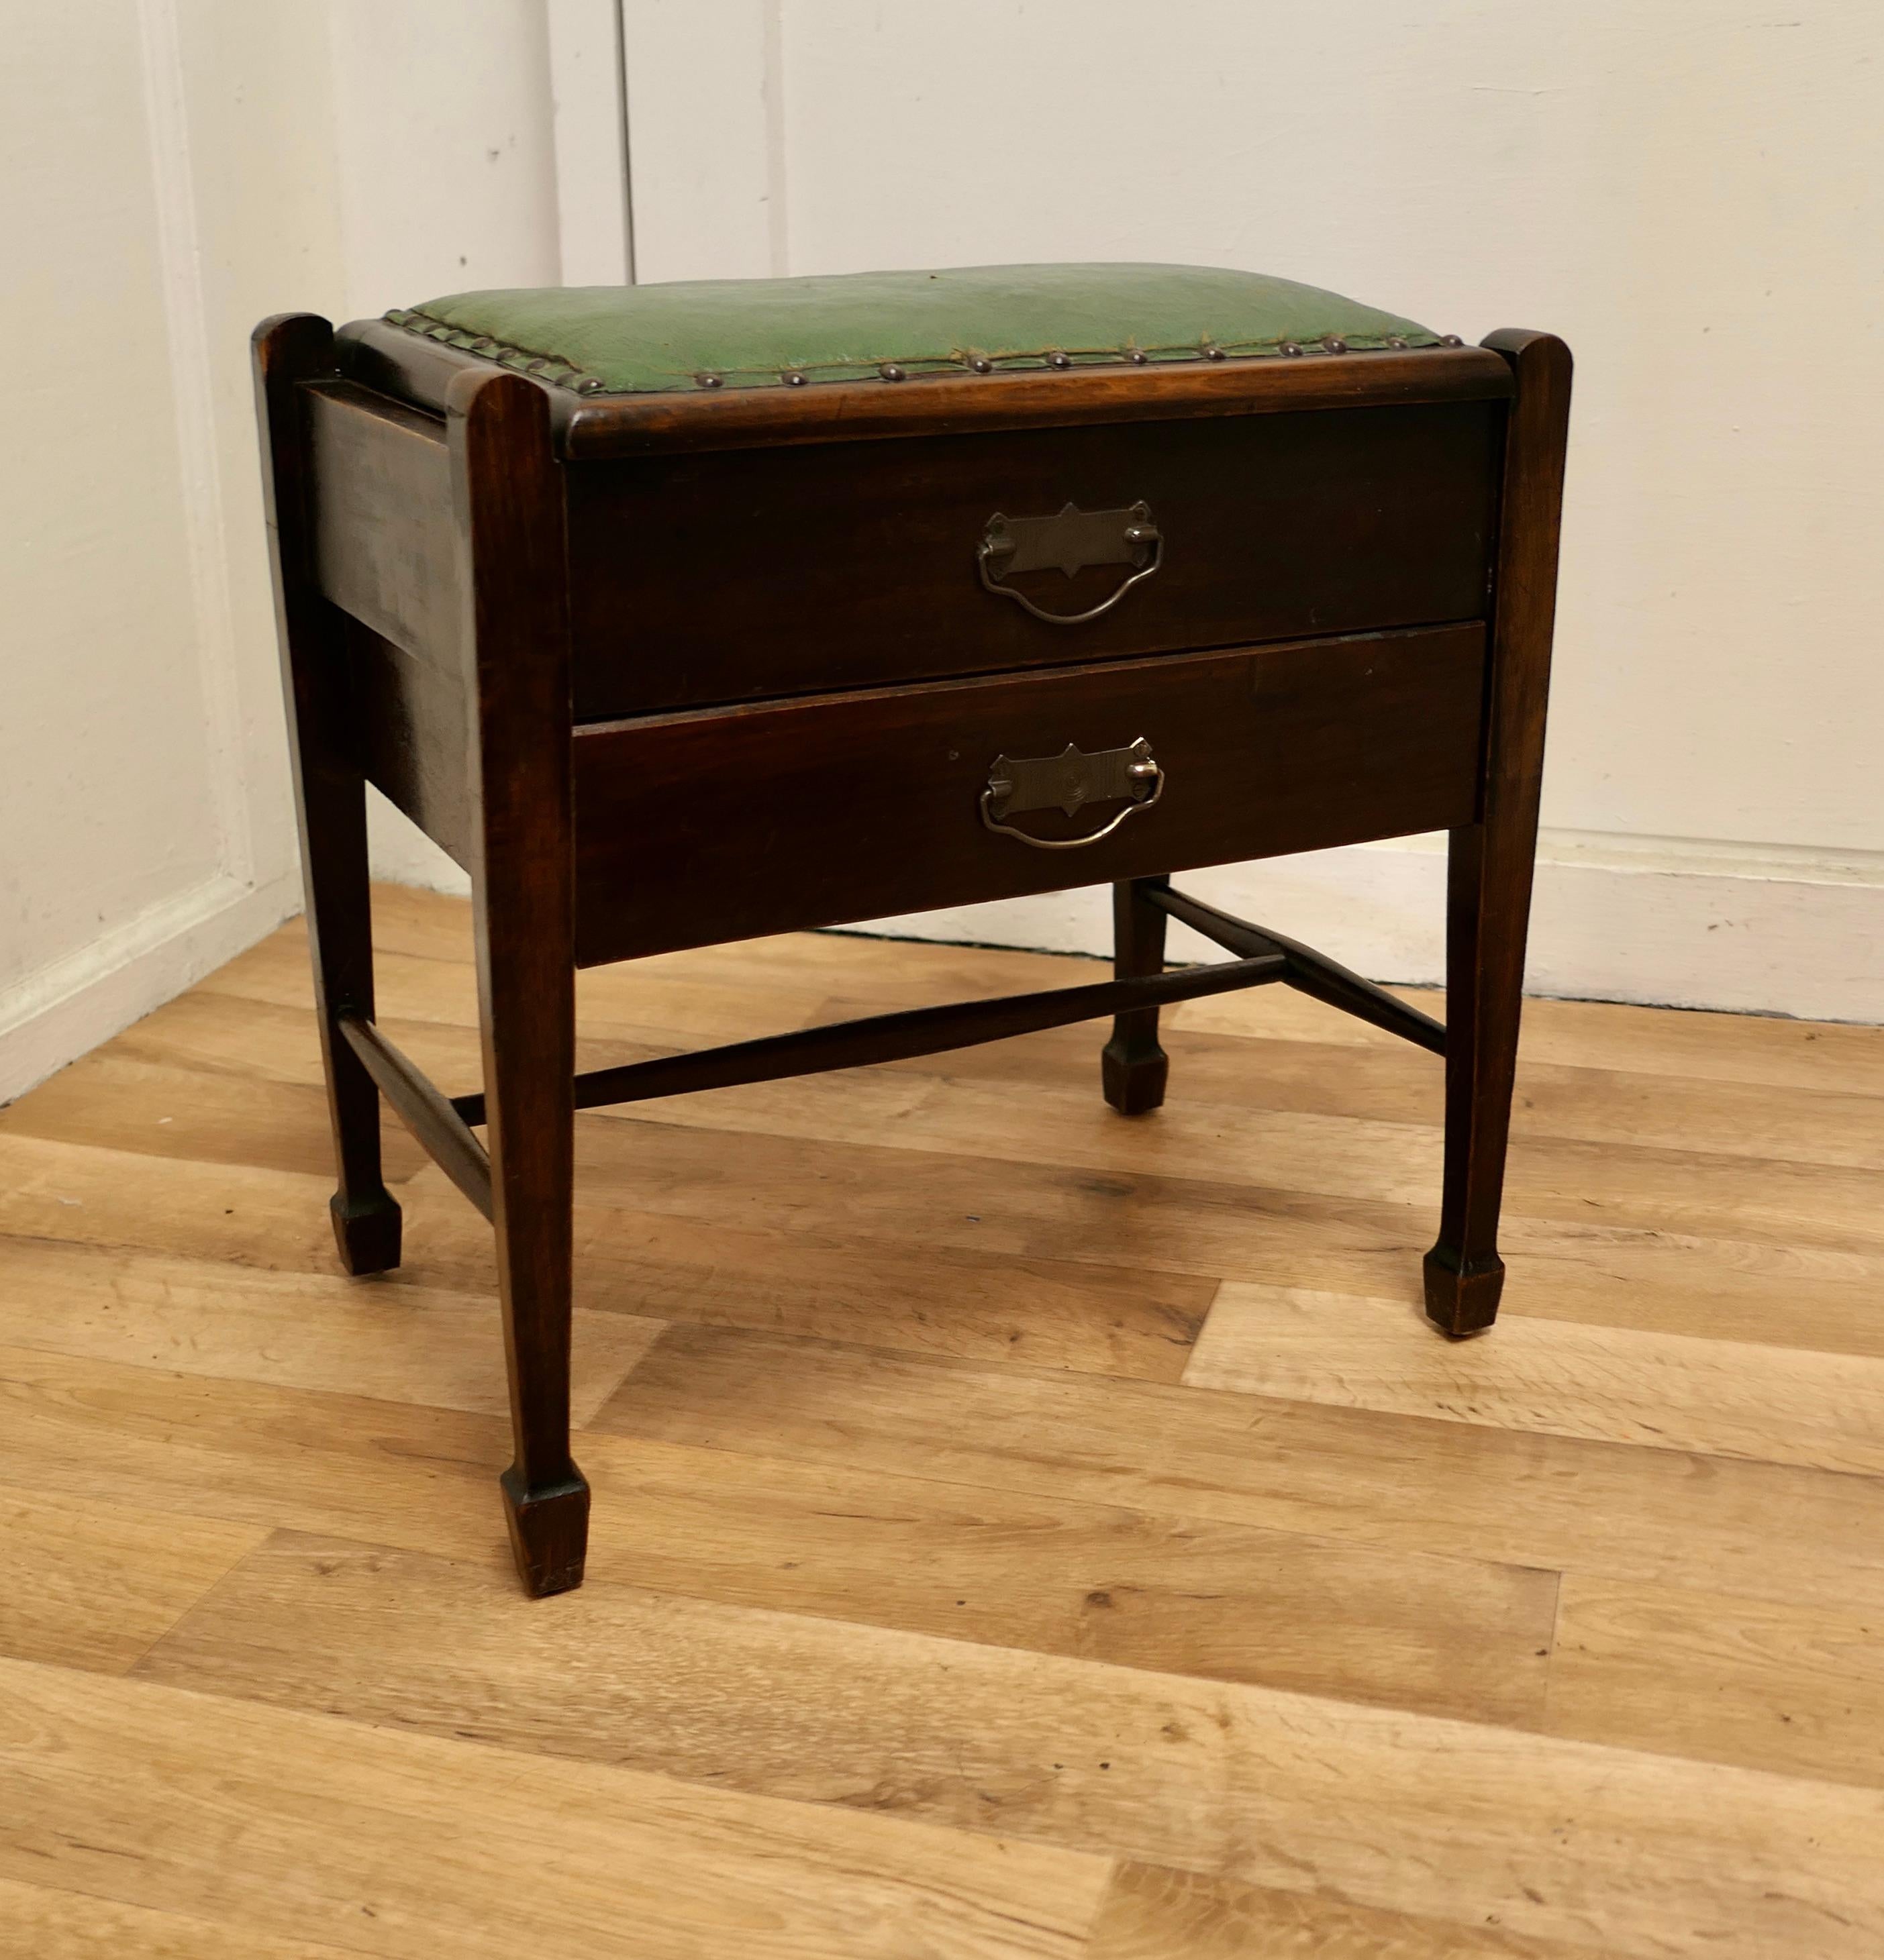 1930s Oak sewing box table with drawer.

This is a good sturdy side table, with a good colour, just open the top to find a blue satin lining in the lid and a divided storage compartment with a removable tray and a drawer underneath all in good